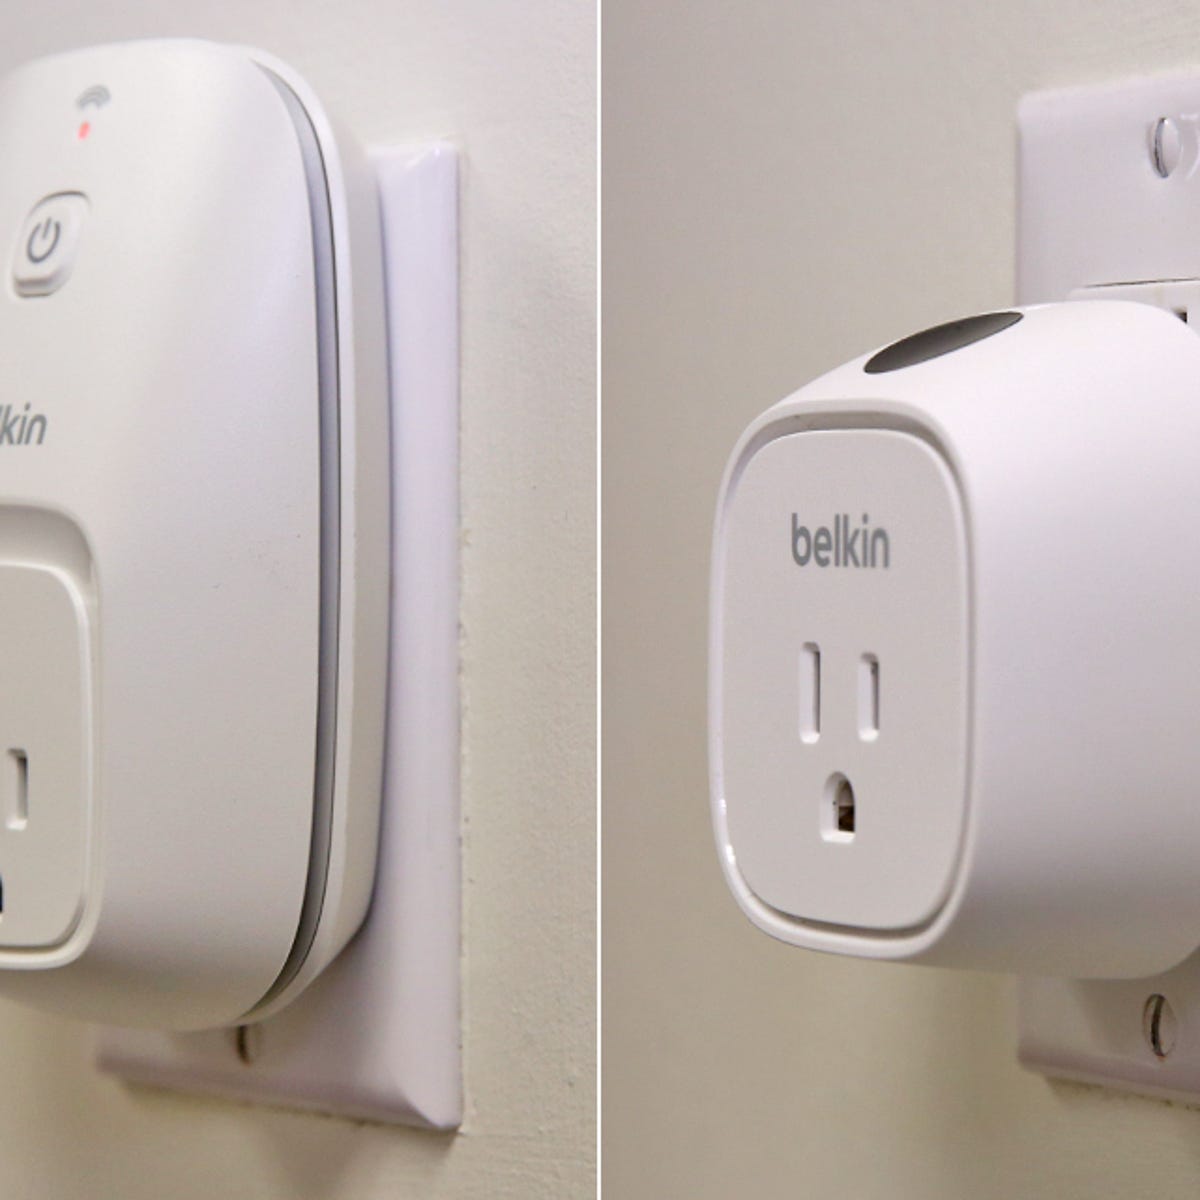 Belkin WeMo Insight Switch review: An even smarter smart-home